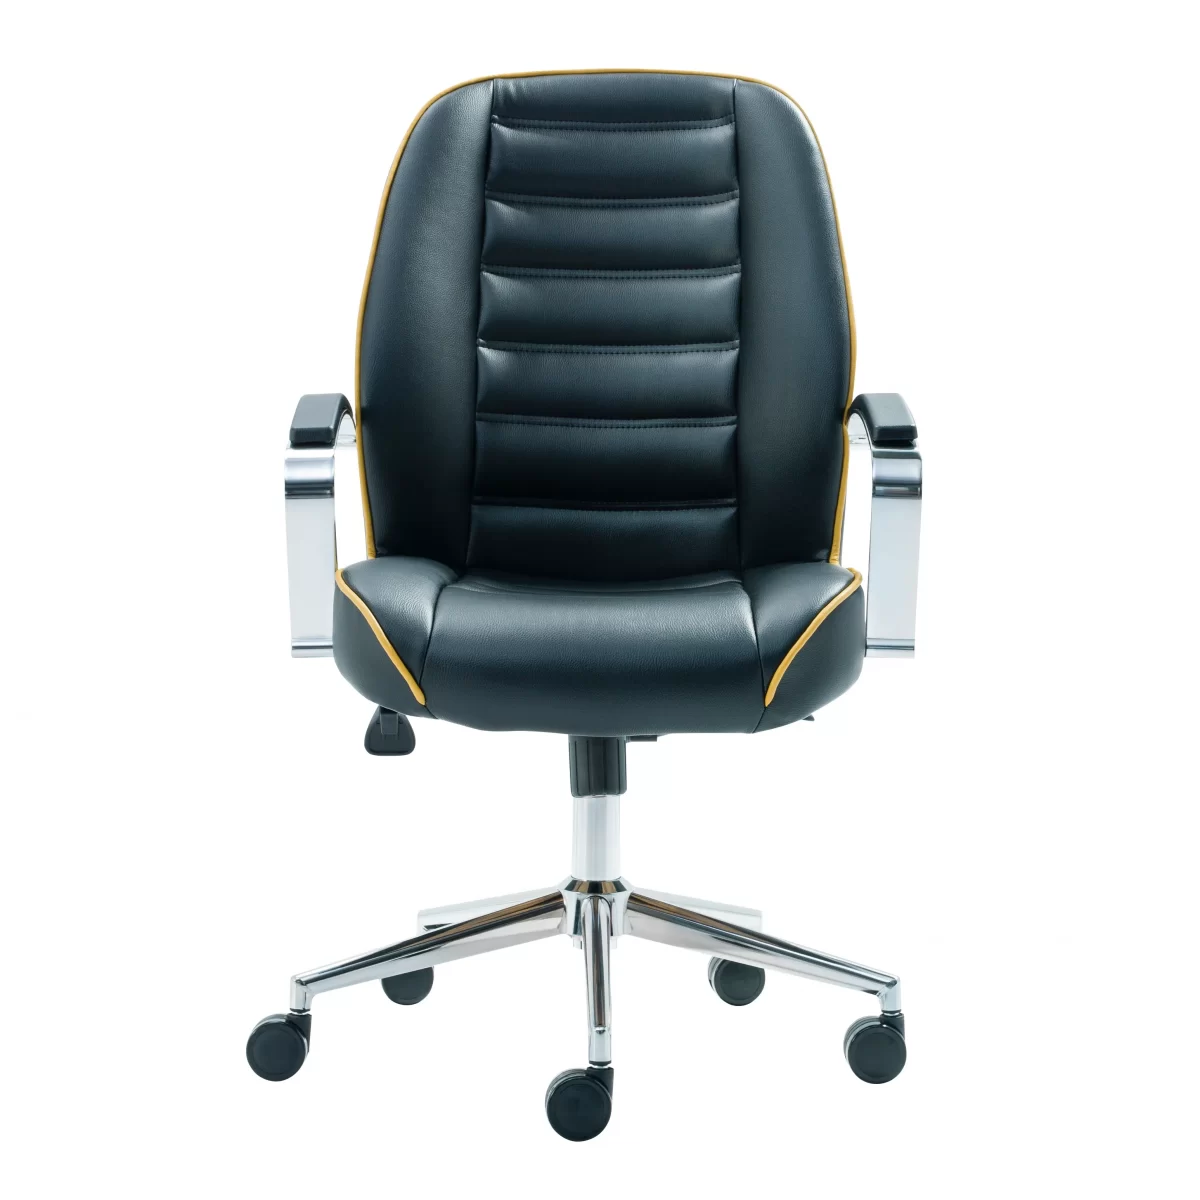 Karina Manager Office Chair Modern Office Chairs Turkey scaled